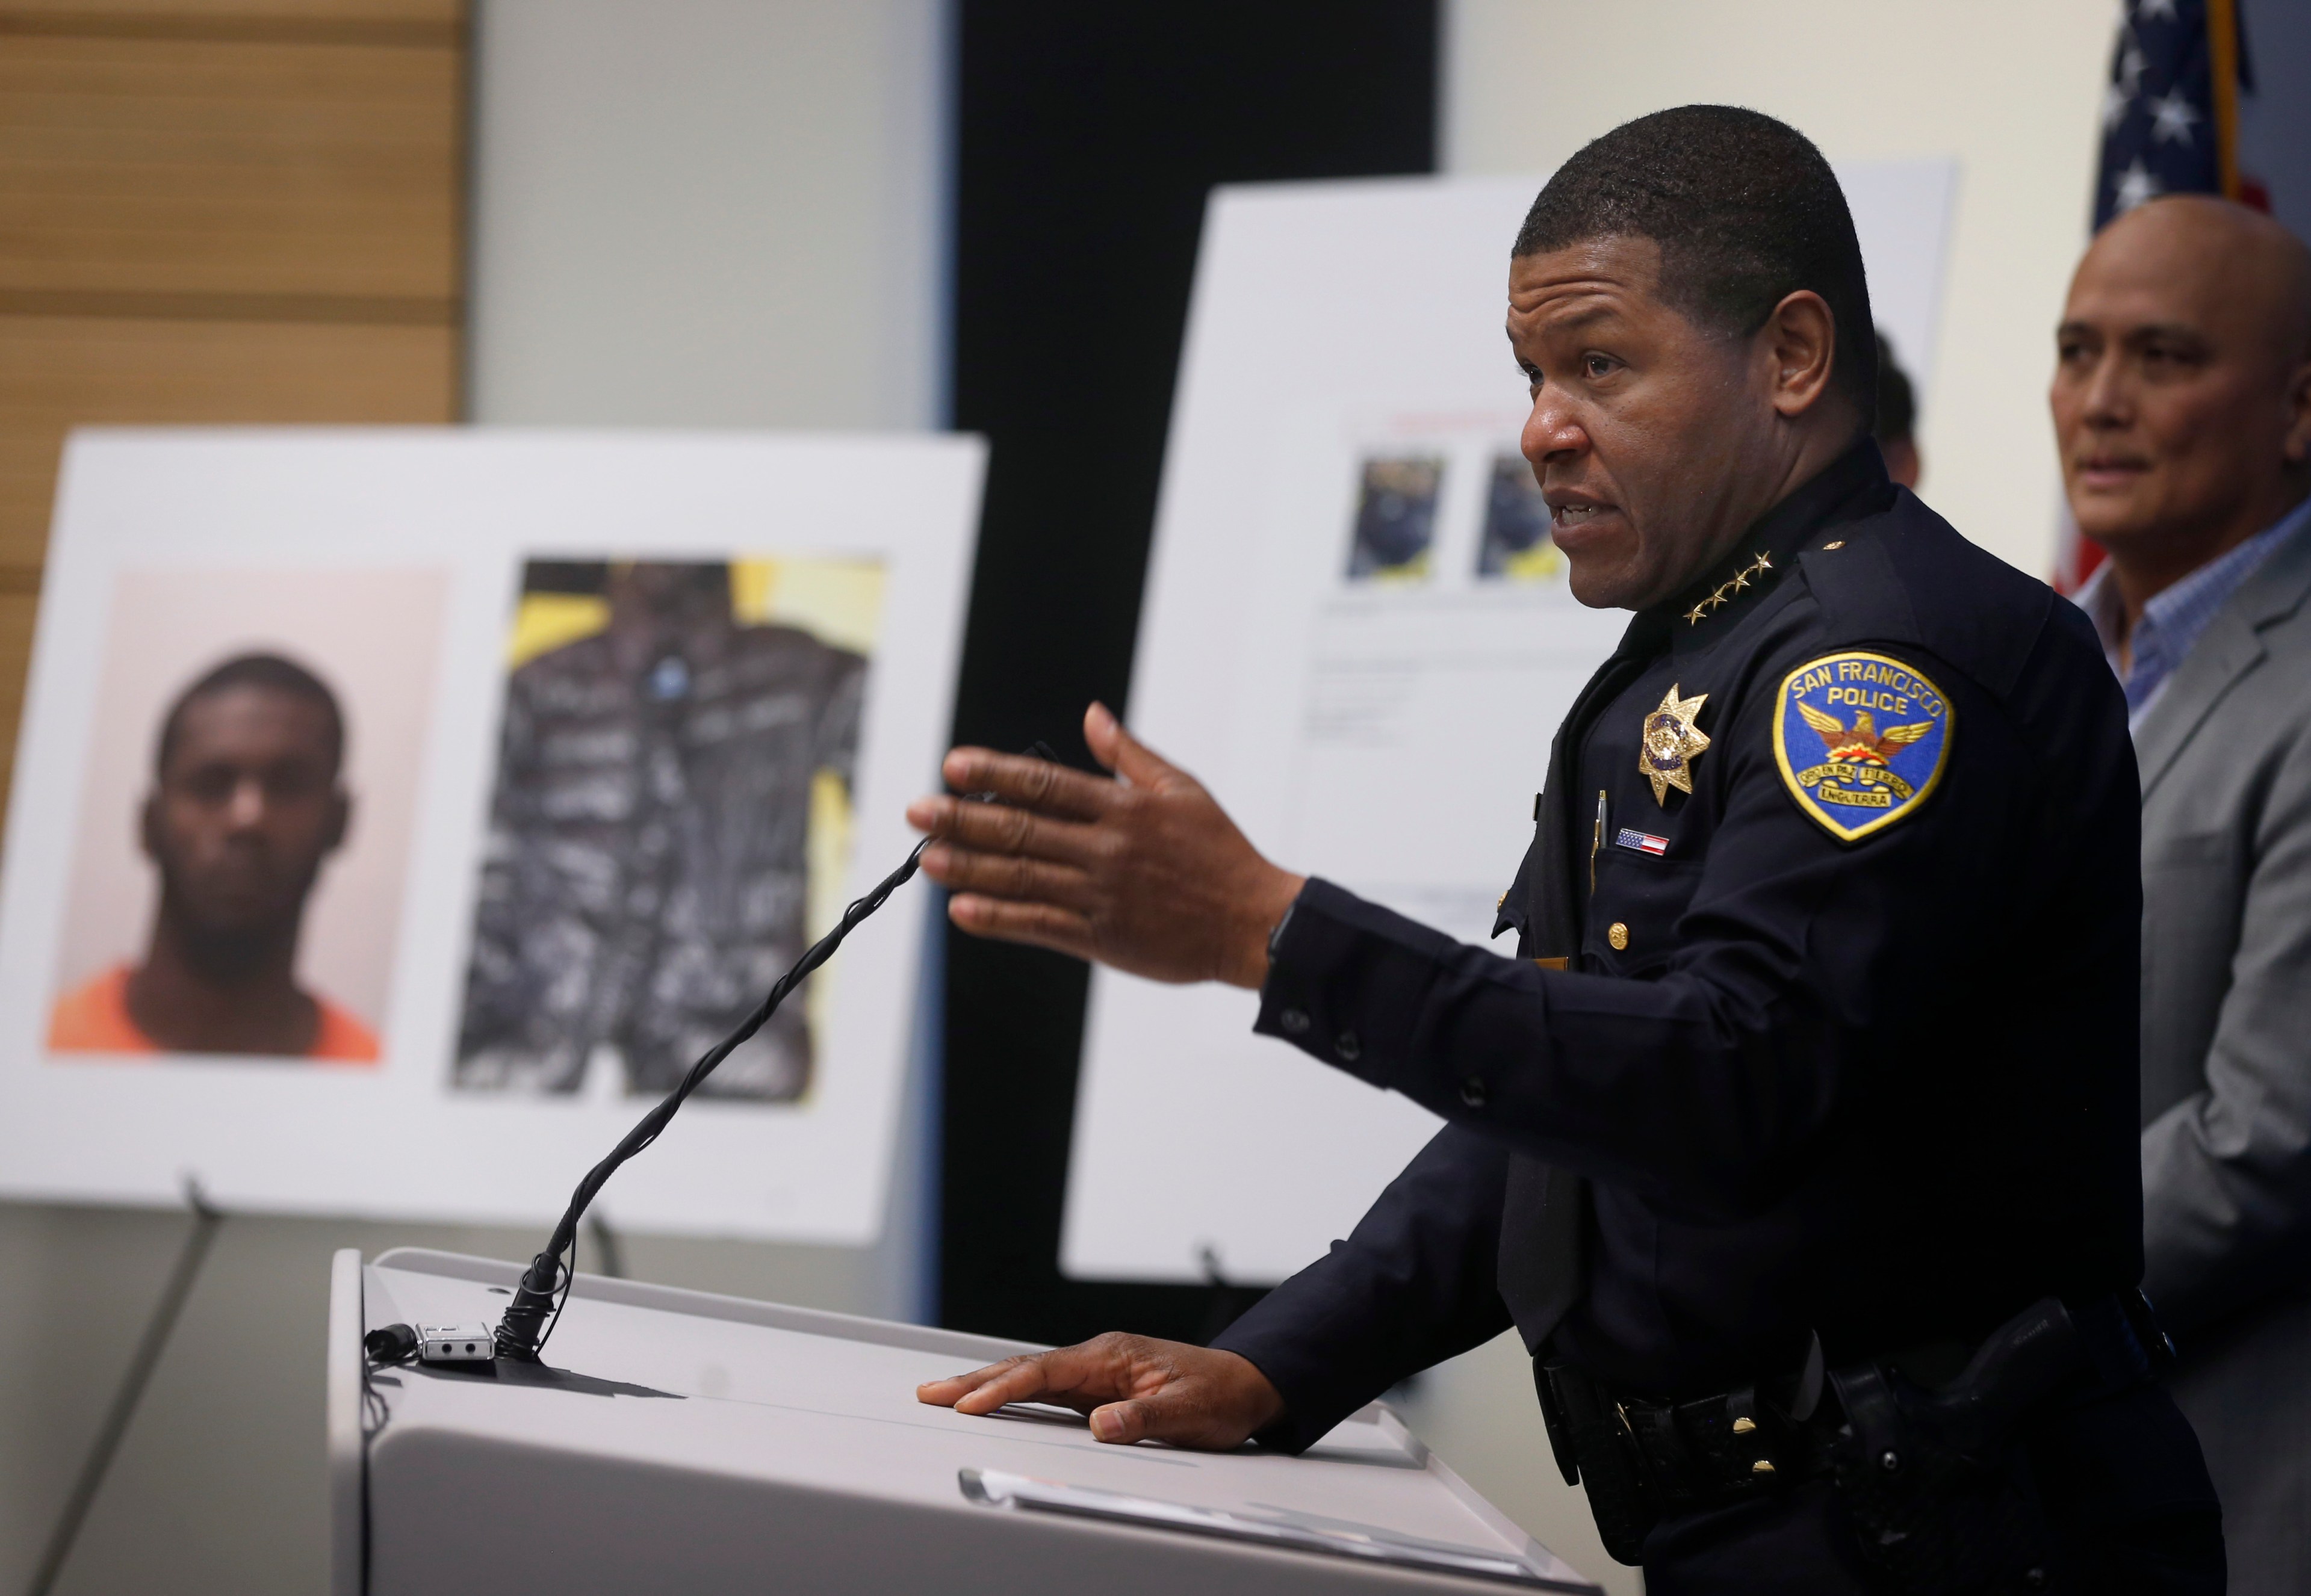 San Francisco Police Chief Bill Scott announces the arrest of Keonte Gathron, 18, who is suspected in the severe beating of 88-year-old Yik Oi Huang, during a news conference at police headquarters in San Francisco, Calif. on Wednesday, Jan. 23, 2019.